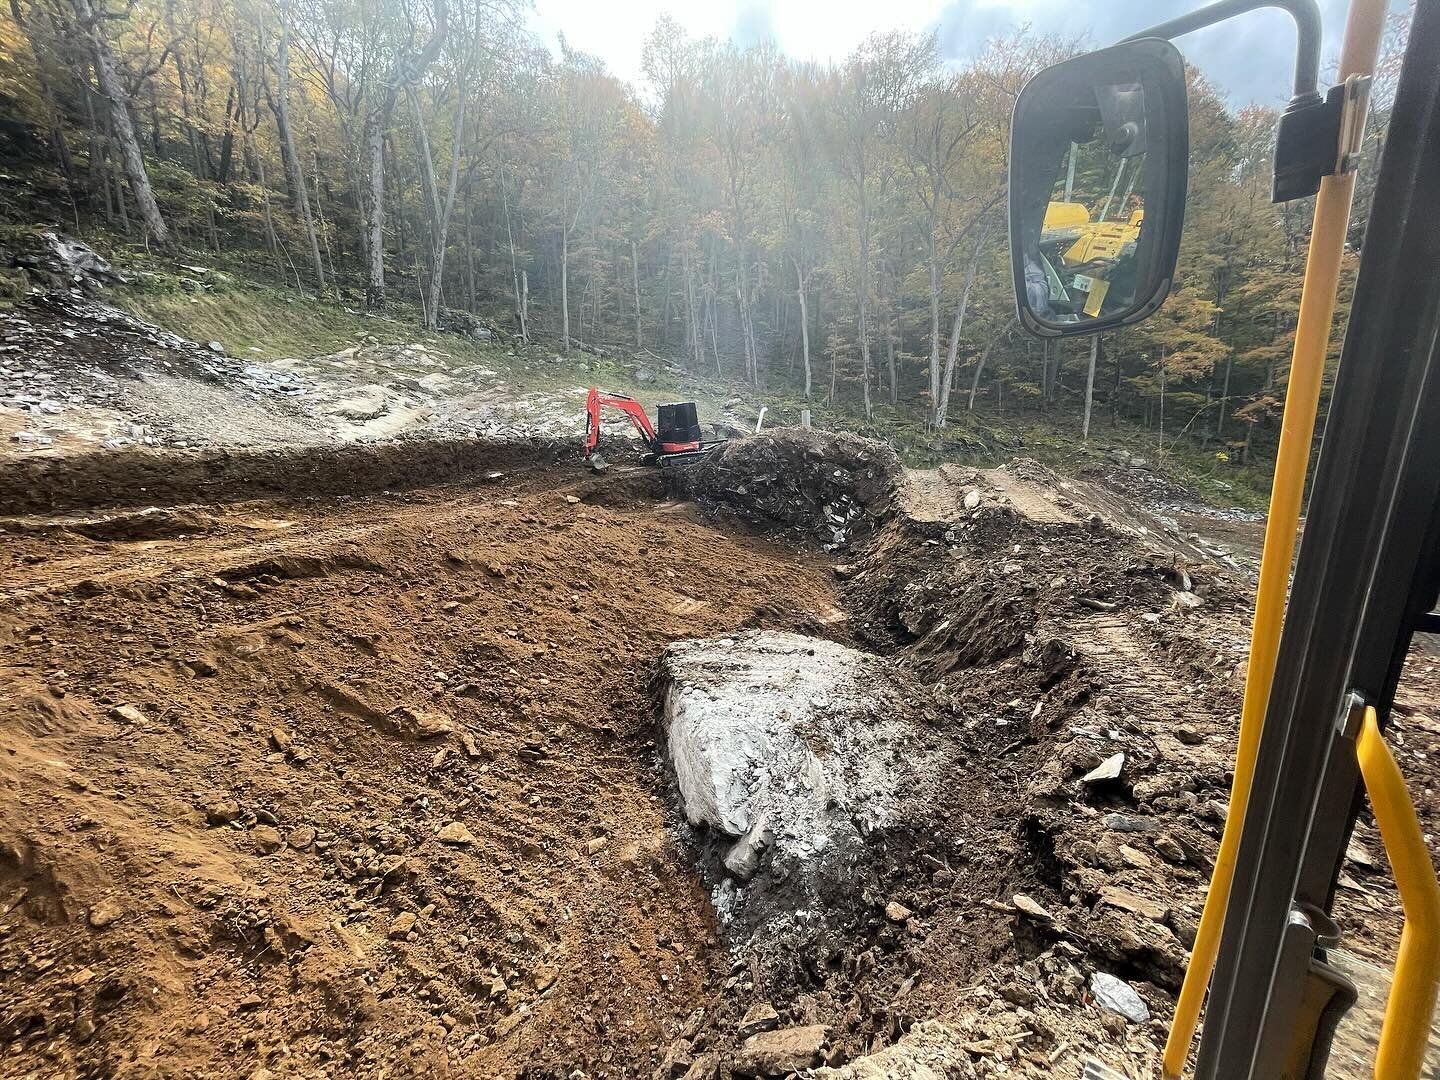 The fun times of a simple basement dig in Boone..#boonenc #excavating